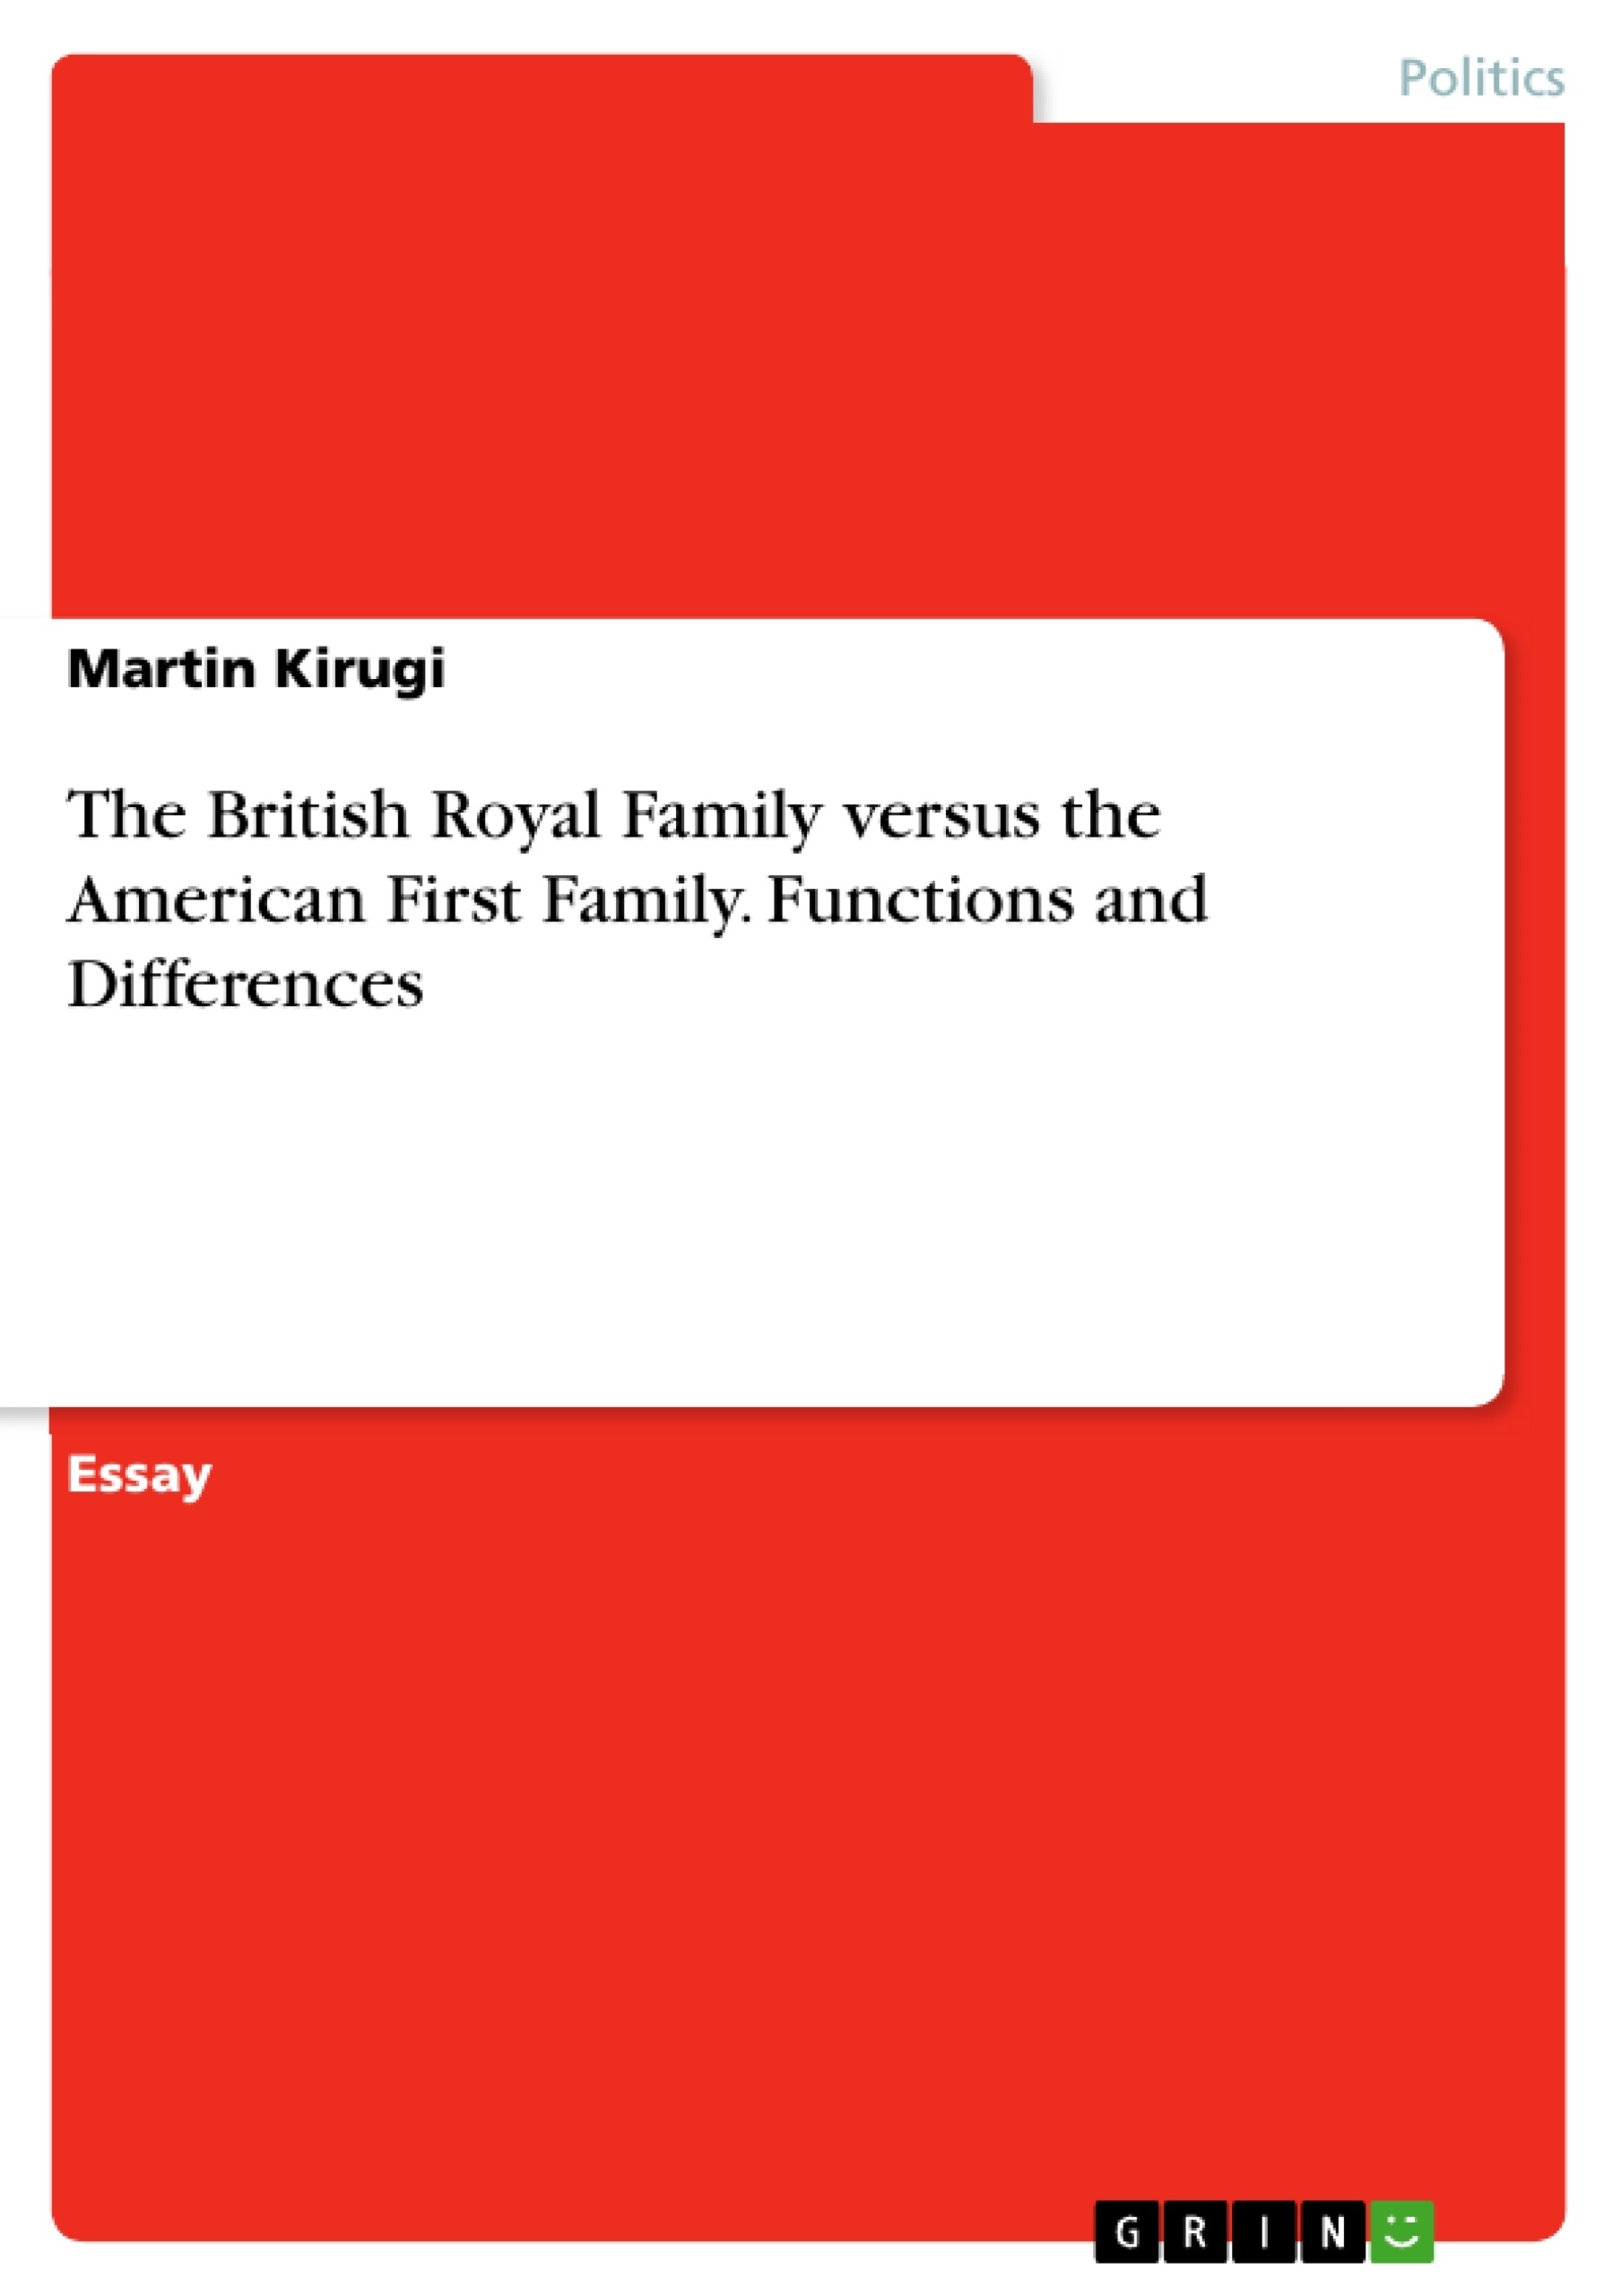 Title: The British Royal Family versus the American First Family. Functions and Differences